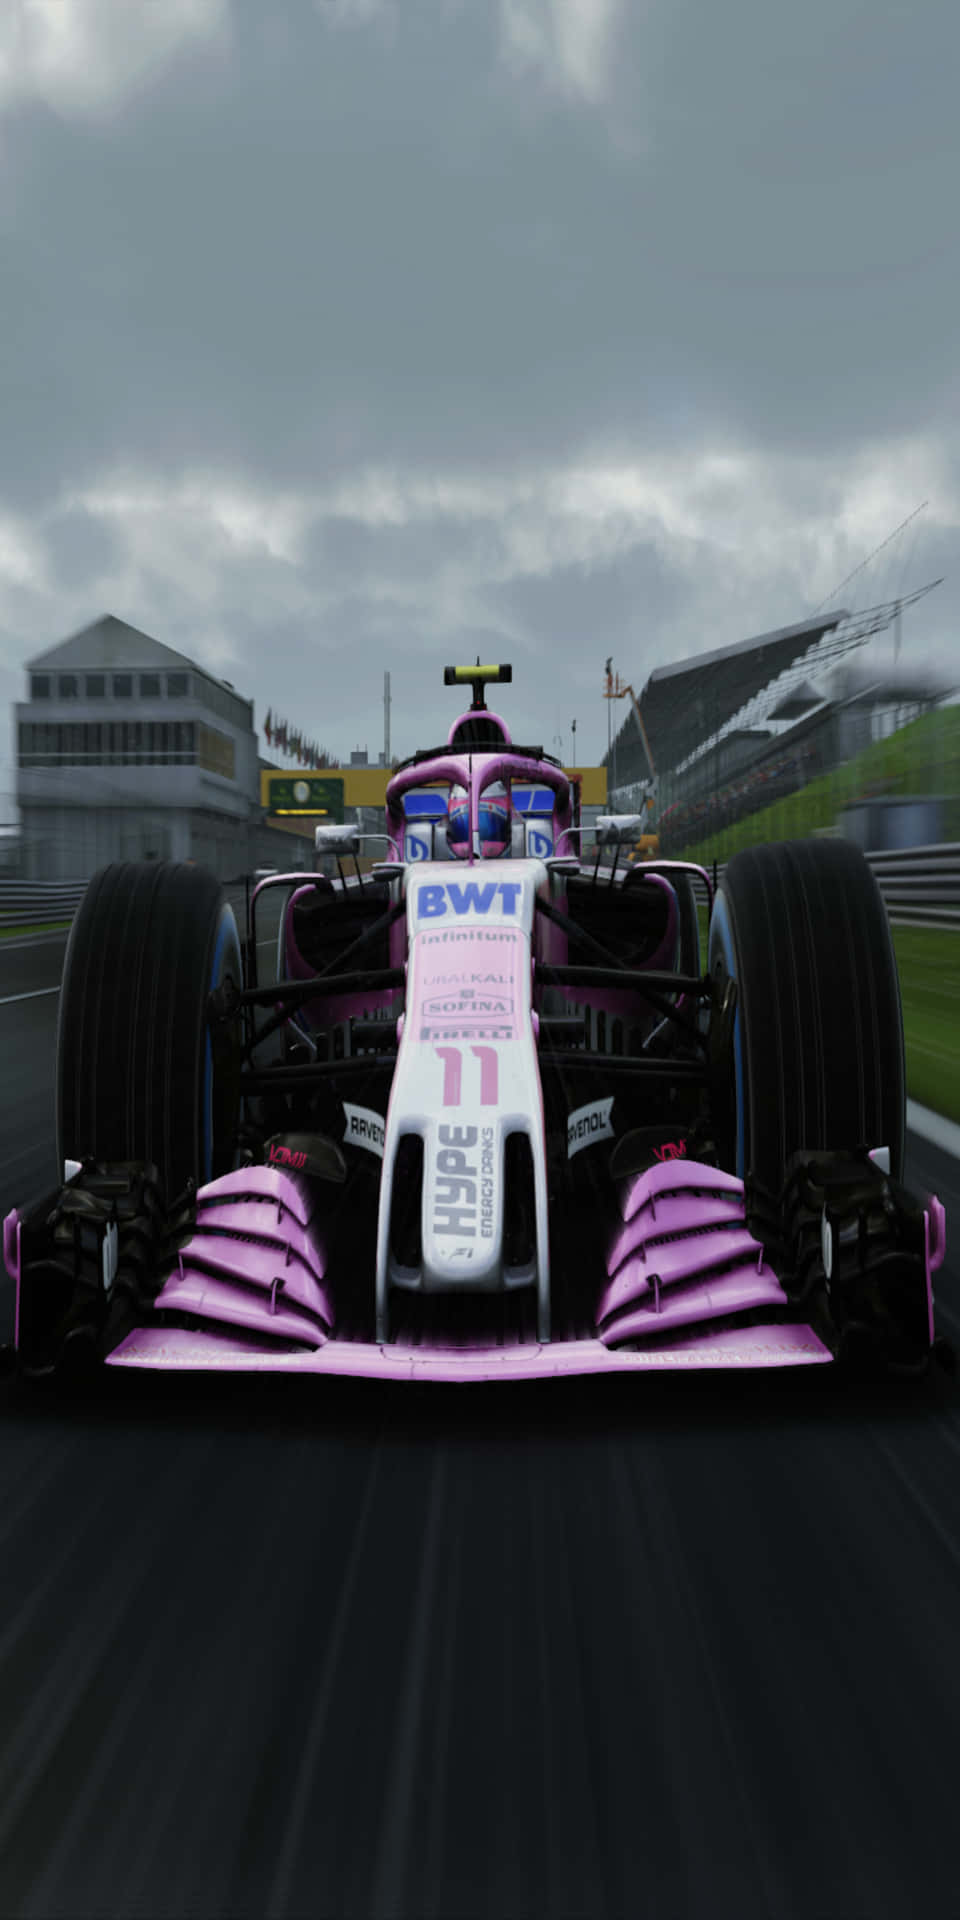 Pixel 3 F1 2018 Background Pink Wing Background